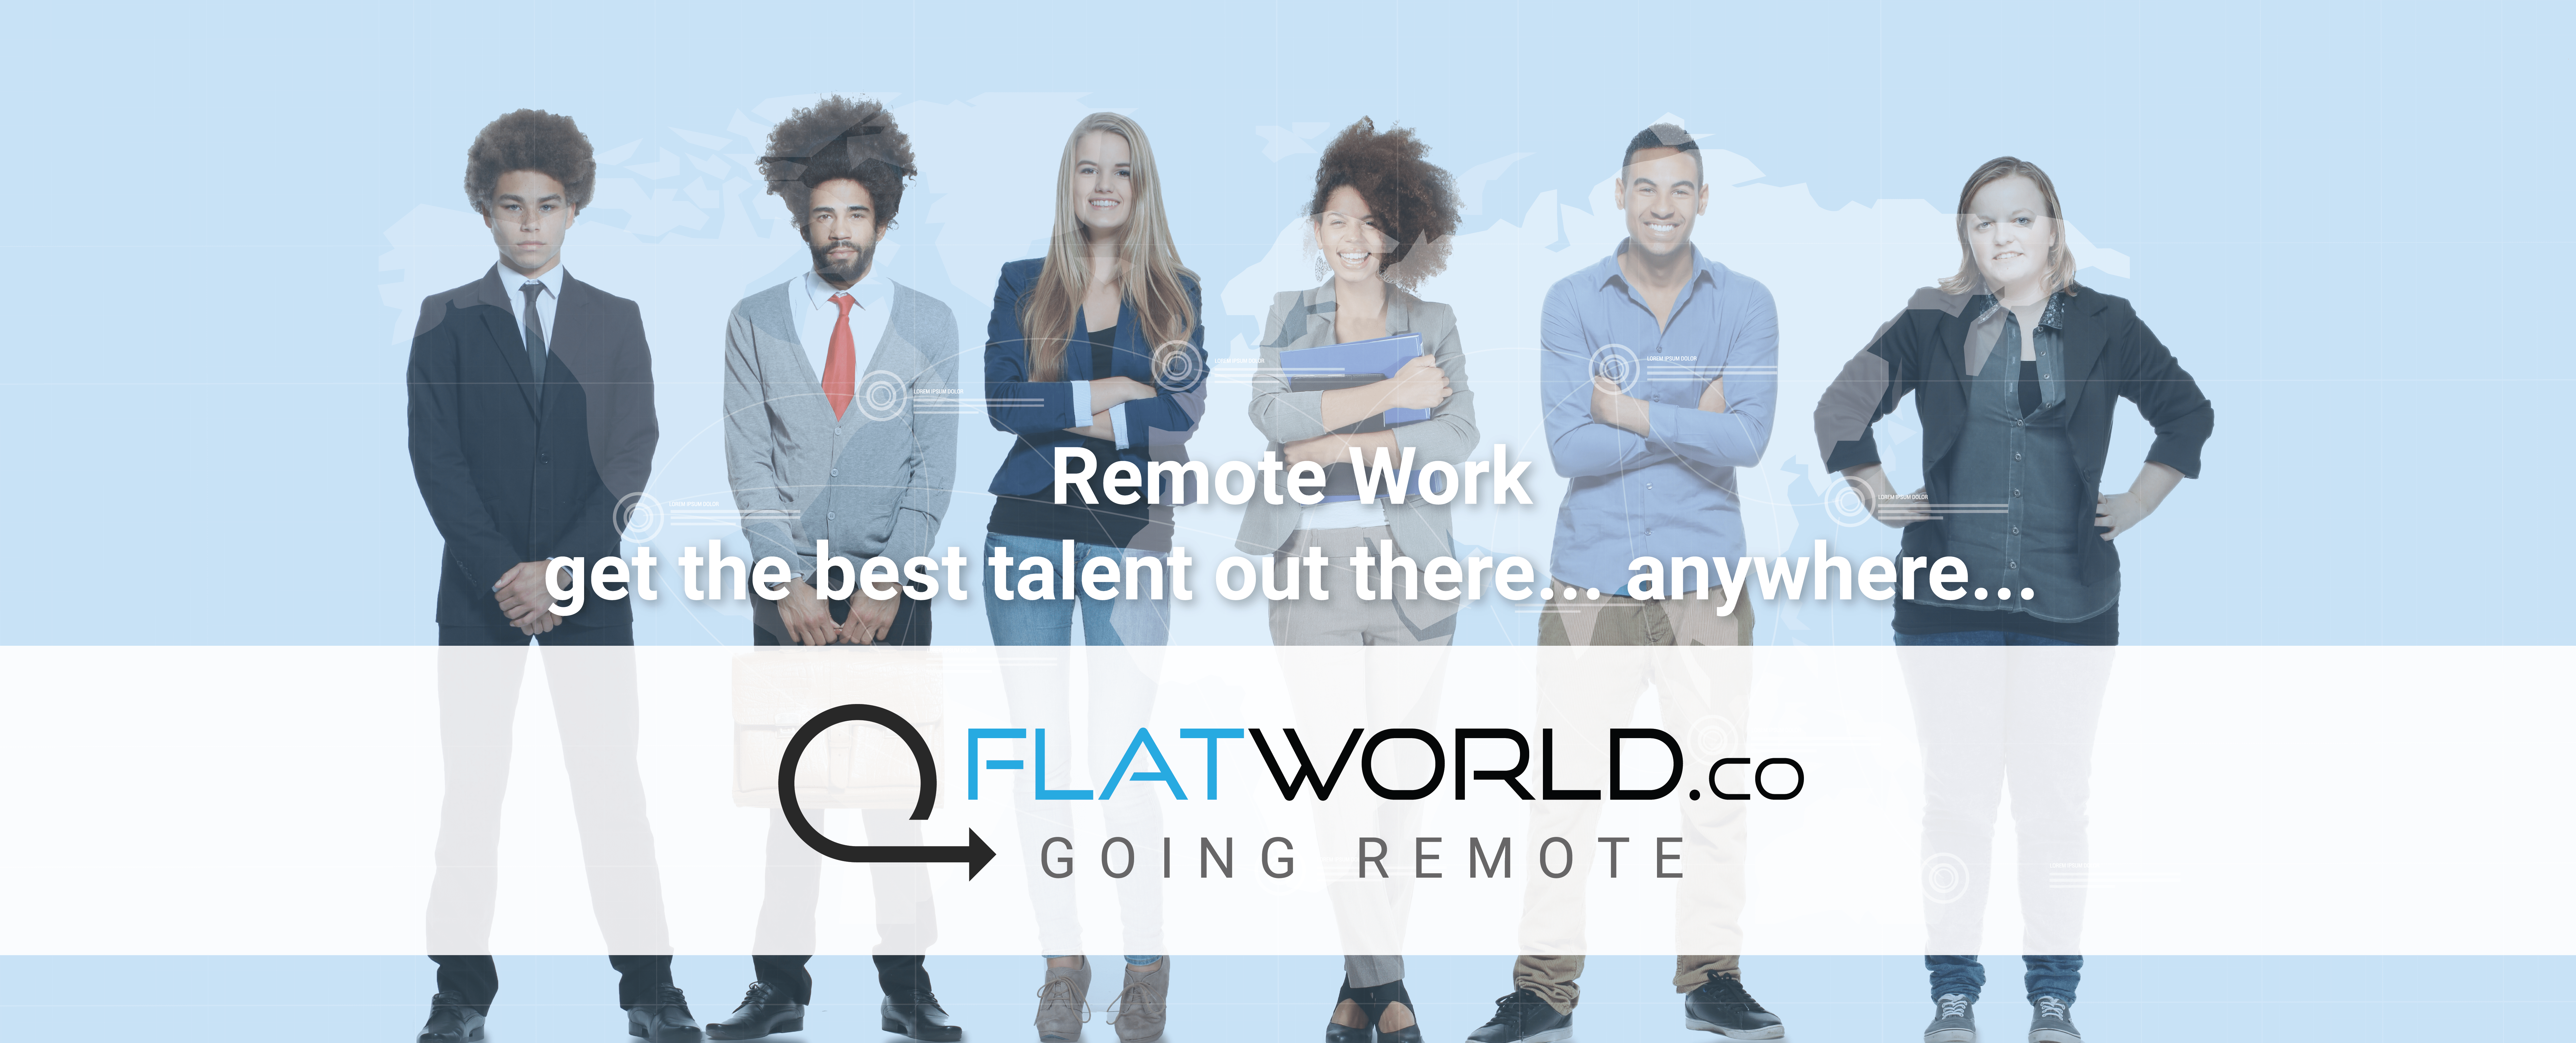 Find detailed information about FlatWorld.co